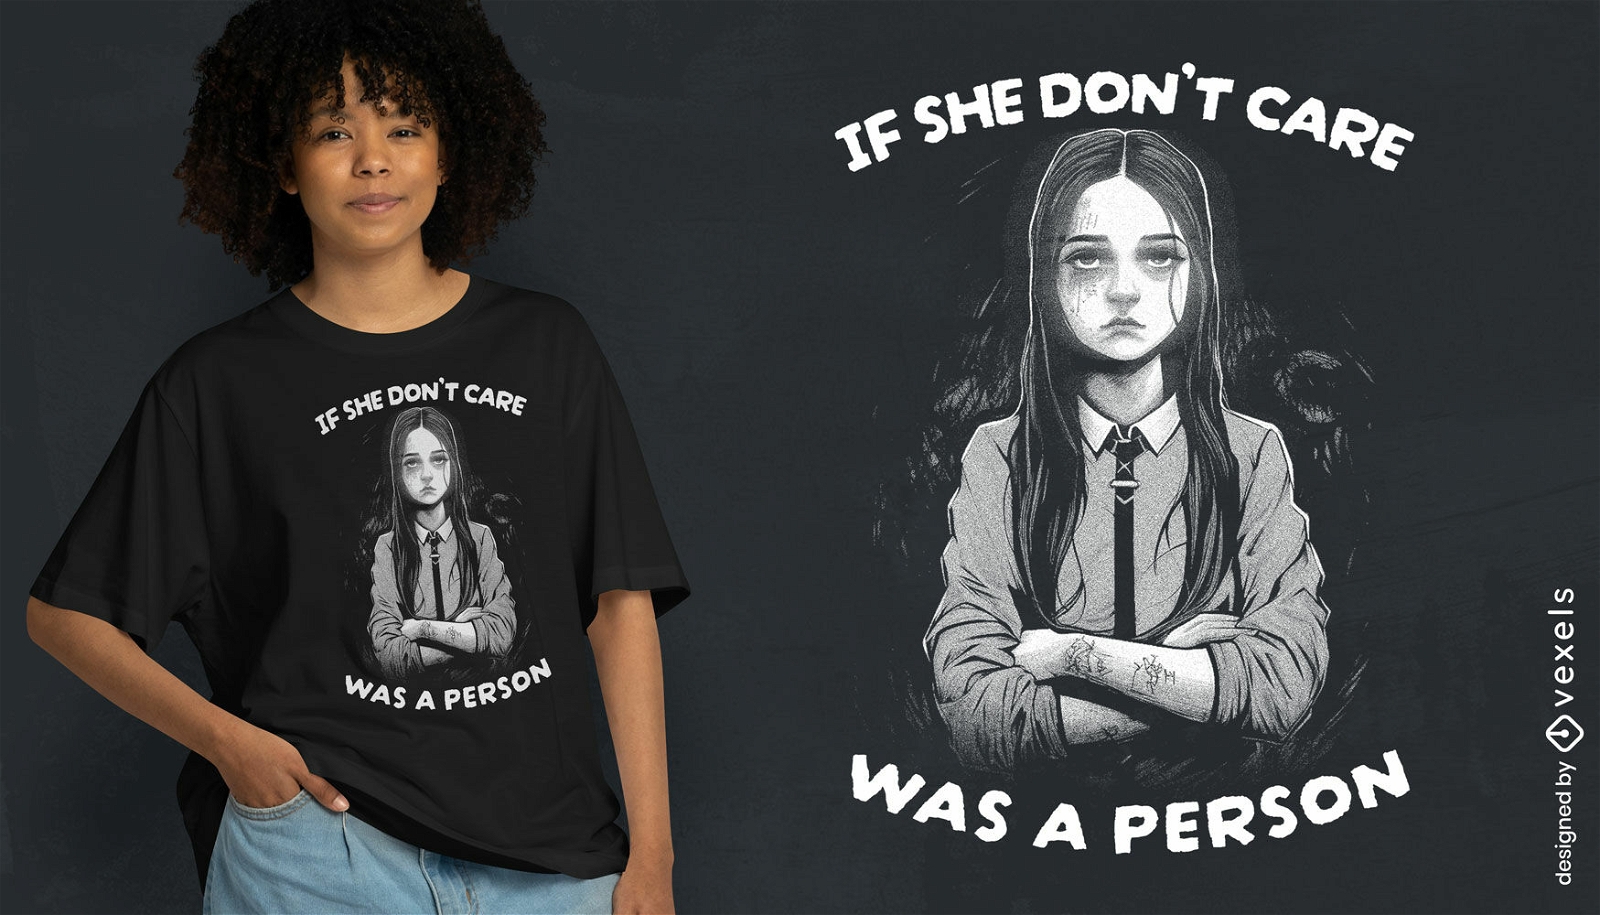 If she don't care was a person t-shirt design